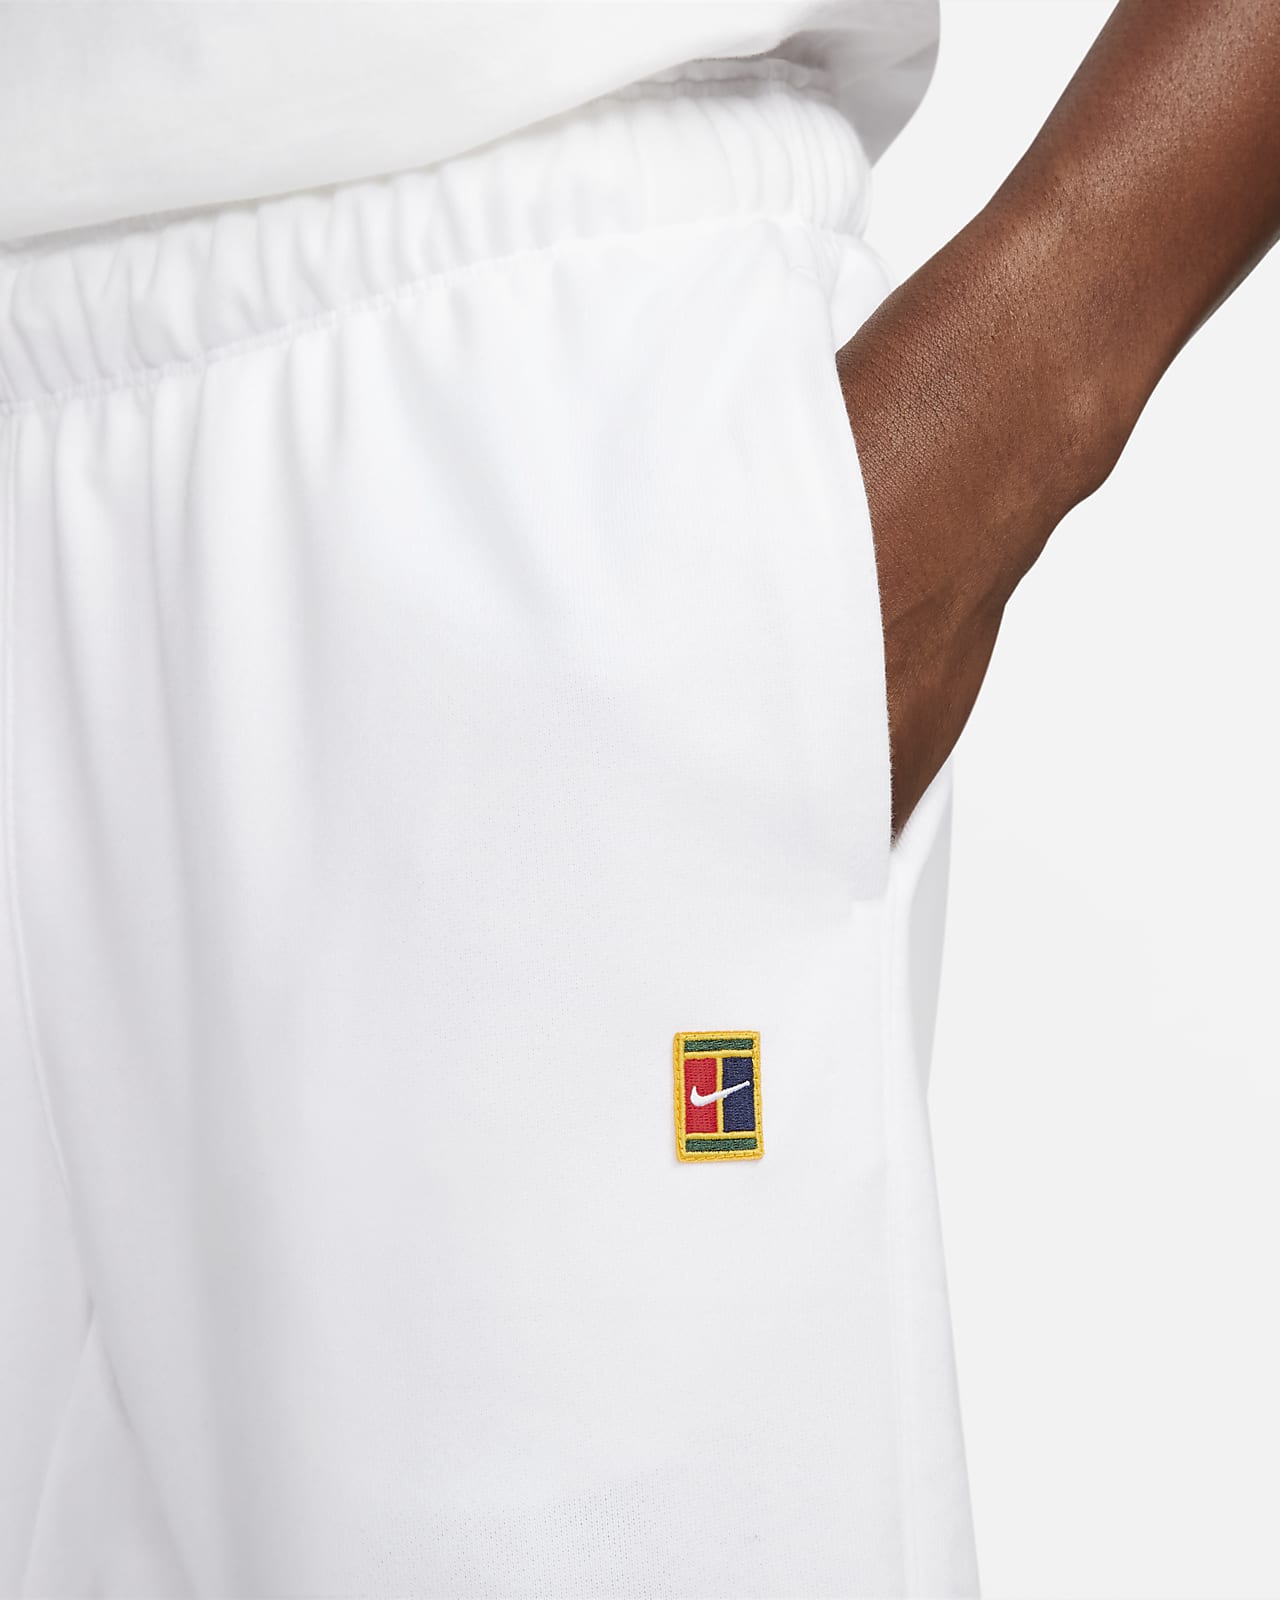 Nike Court Heritage Men's French Terry Tennis Pants